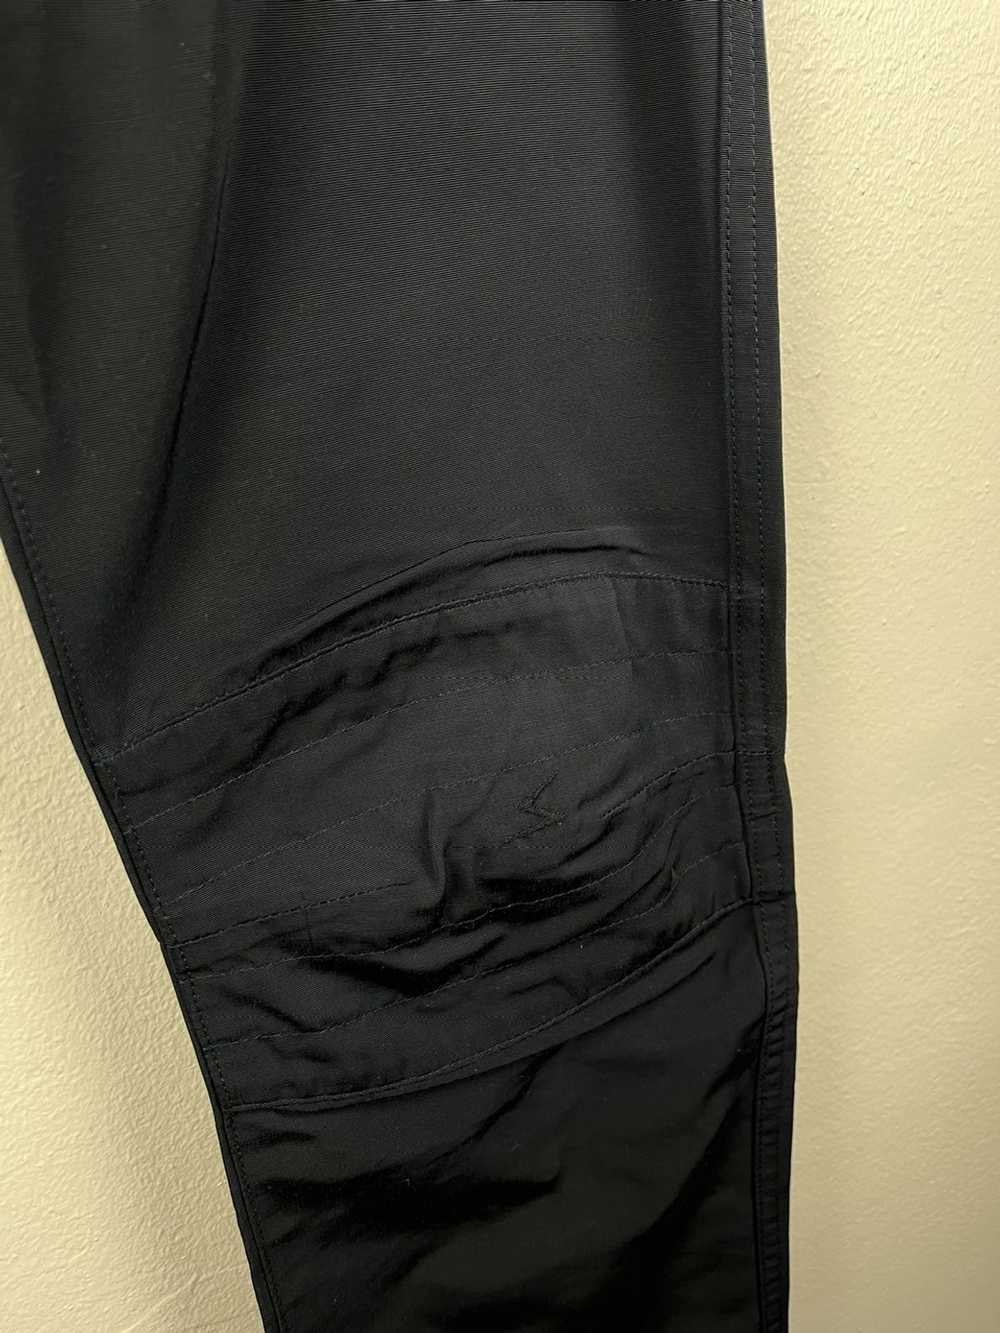 Undercover Undercover Pants - image 2